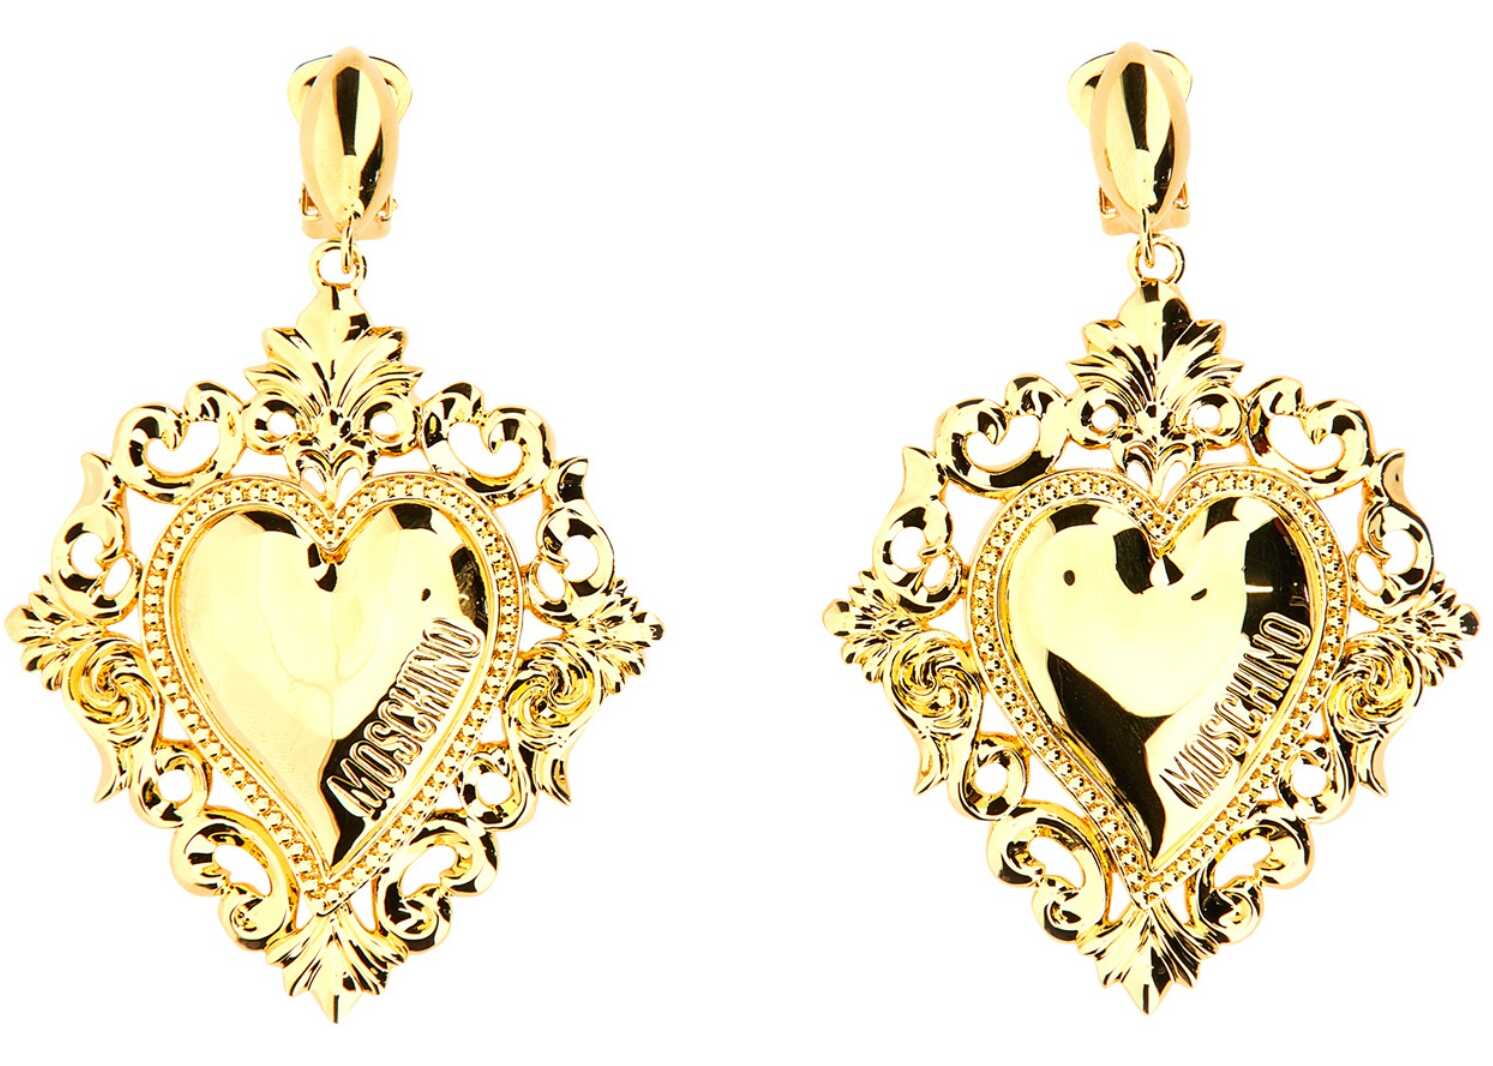 Moschino "Gold Heart" Earrings GOLD image10